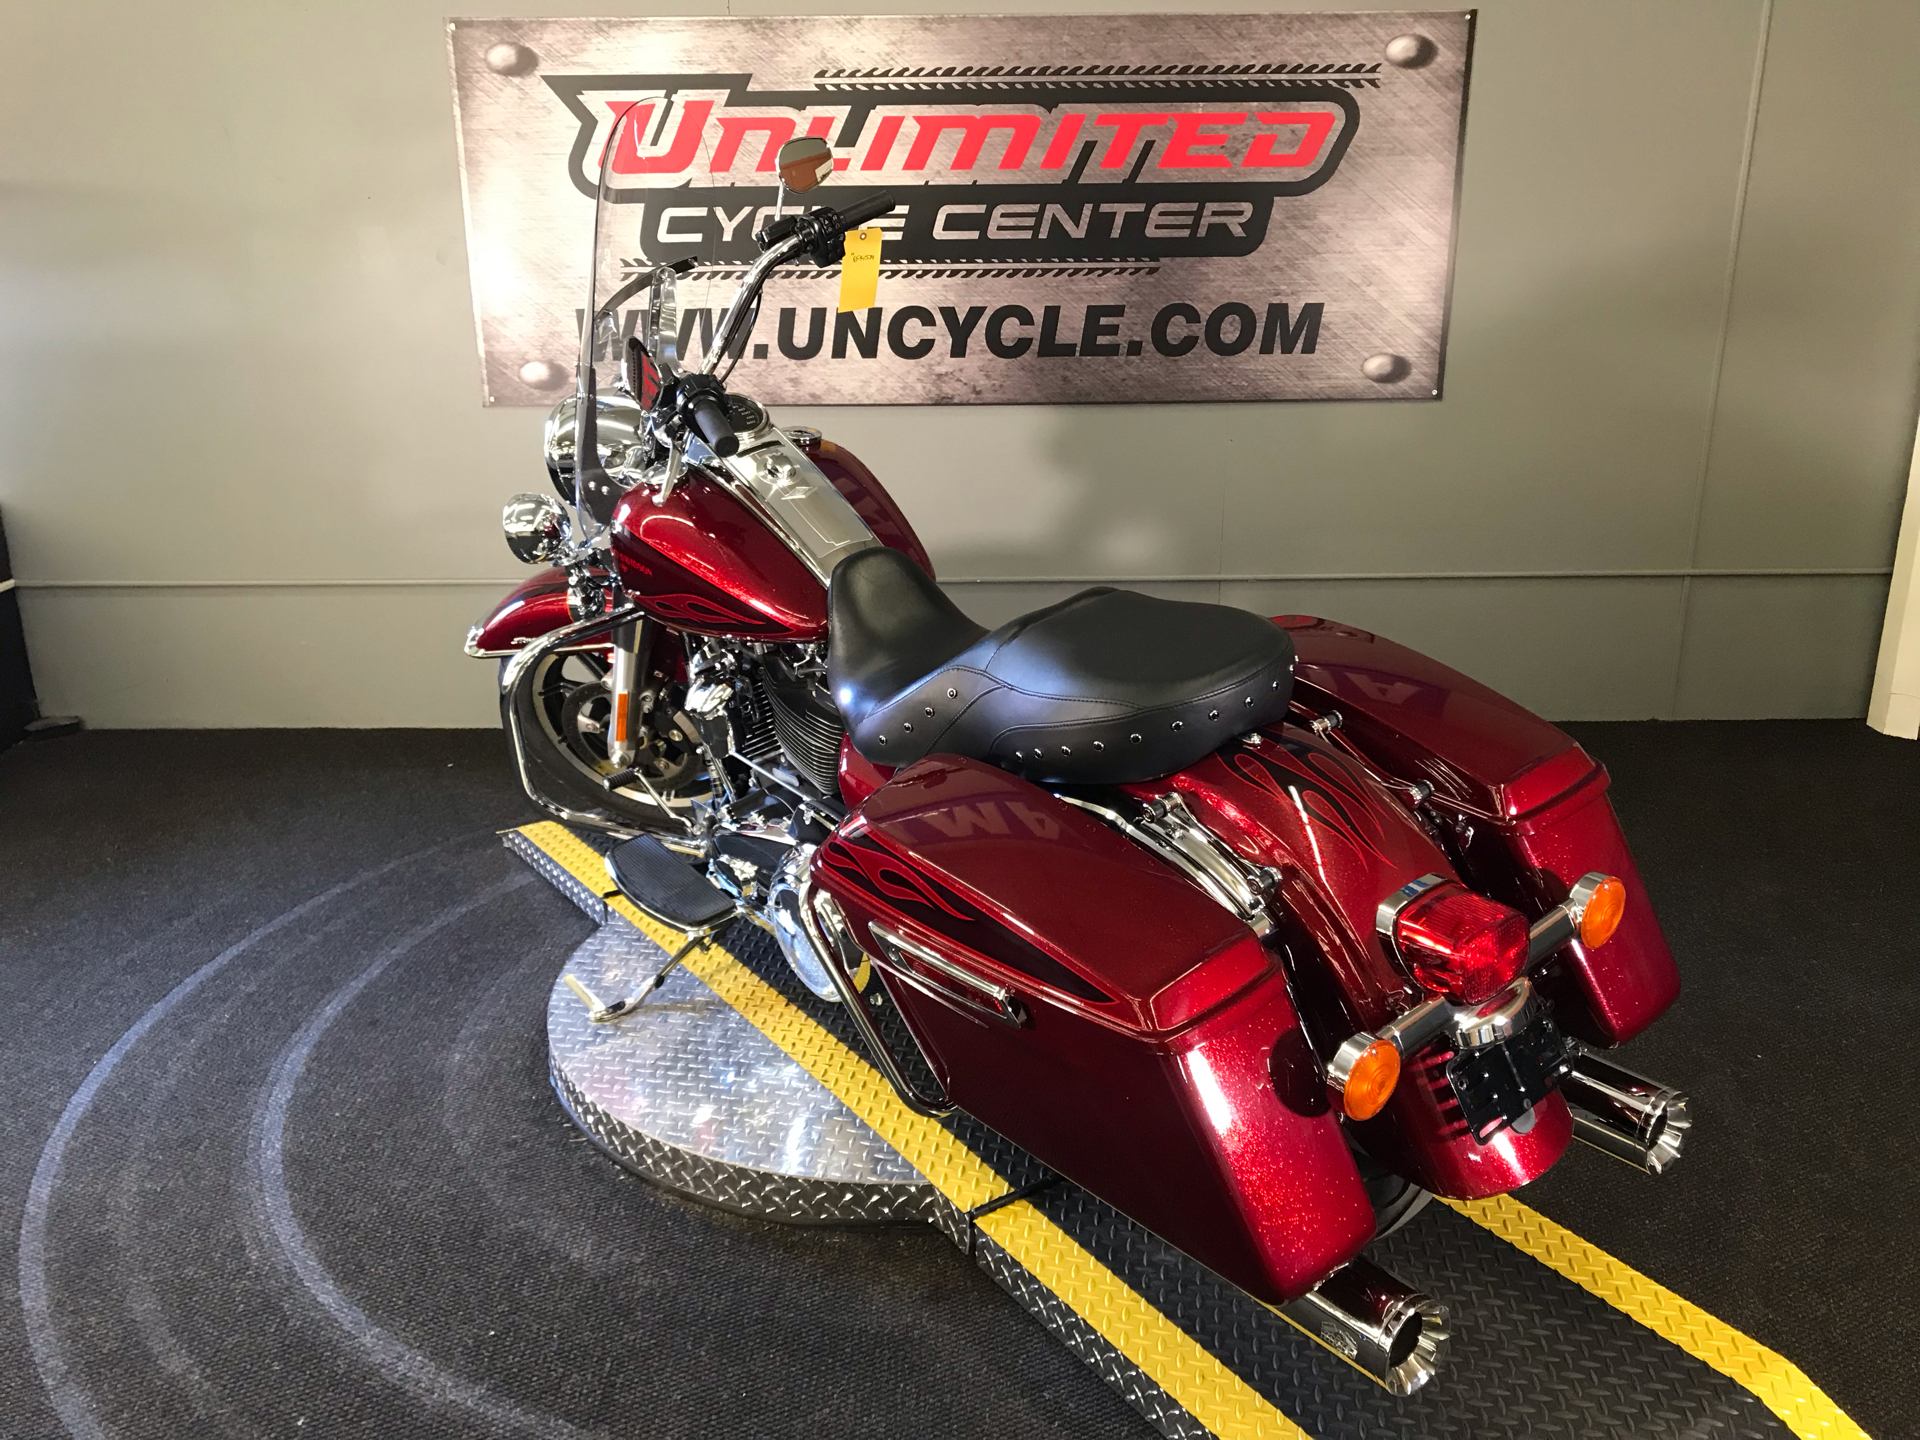 Used 2017 Harley Davidson Road King Motorcycles In Tyrone Pa 694539 Hard Candy Hot Rod Red Flake